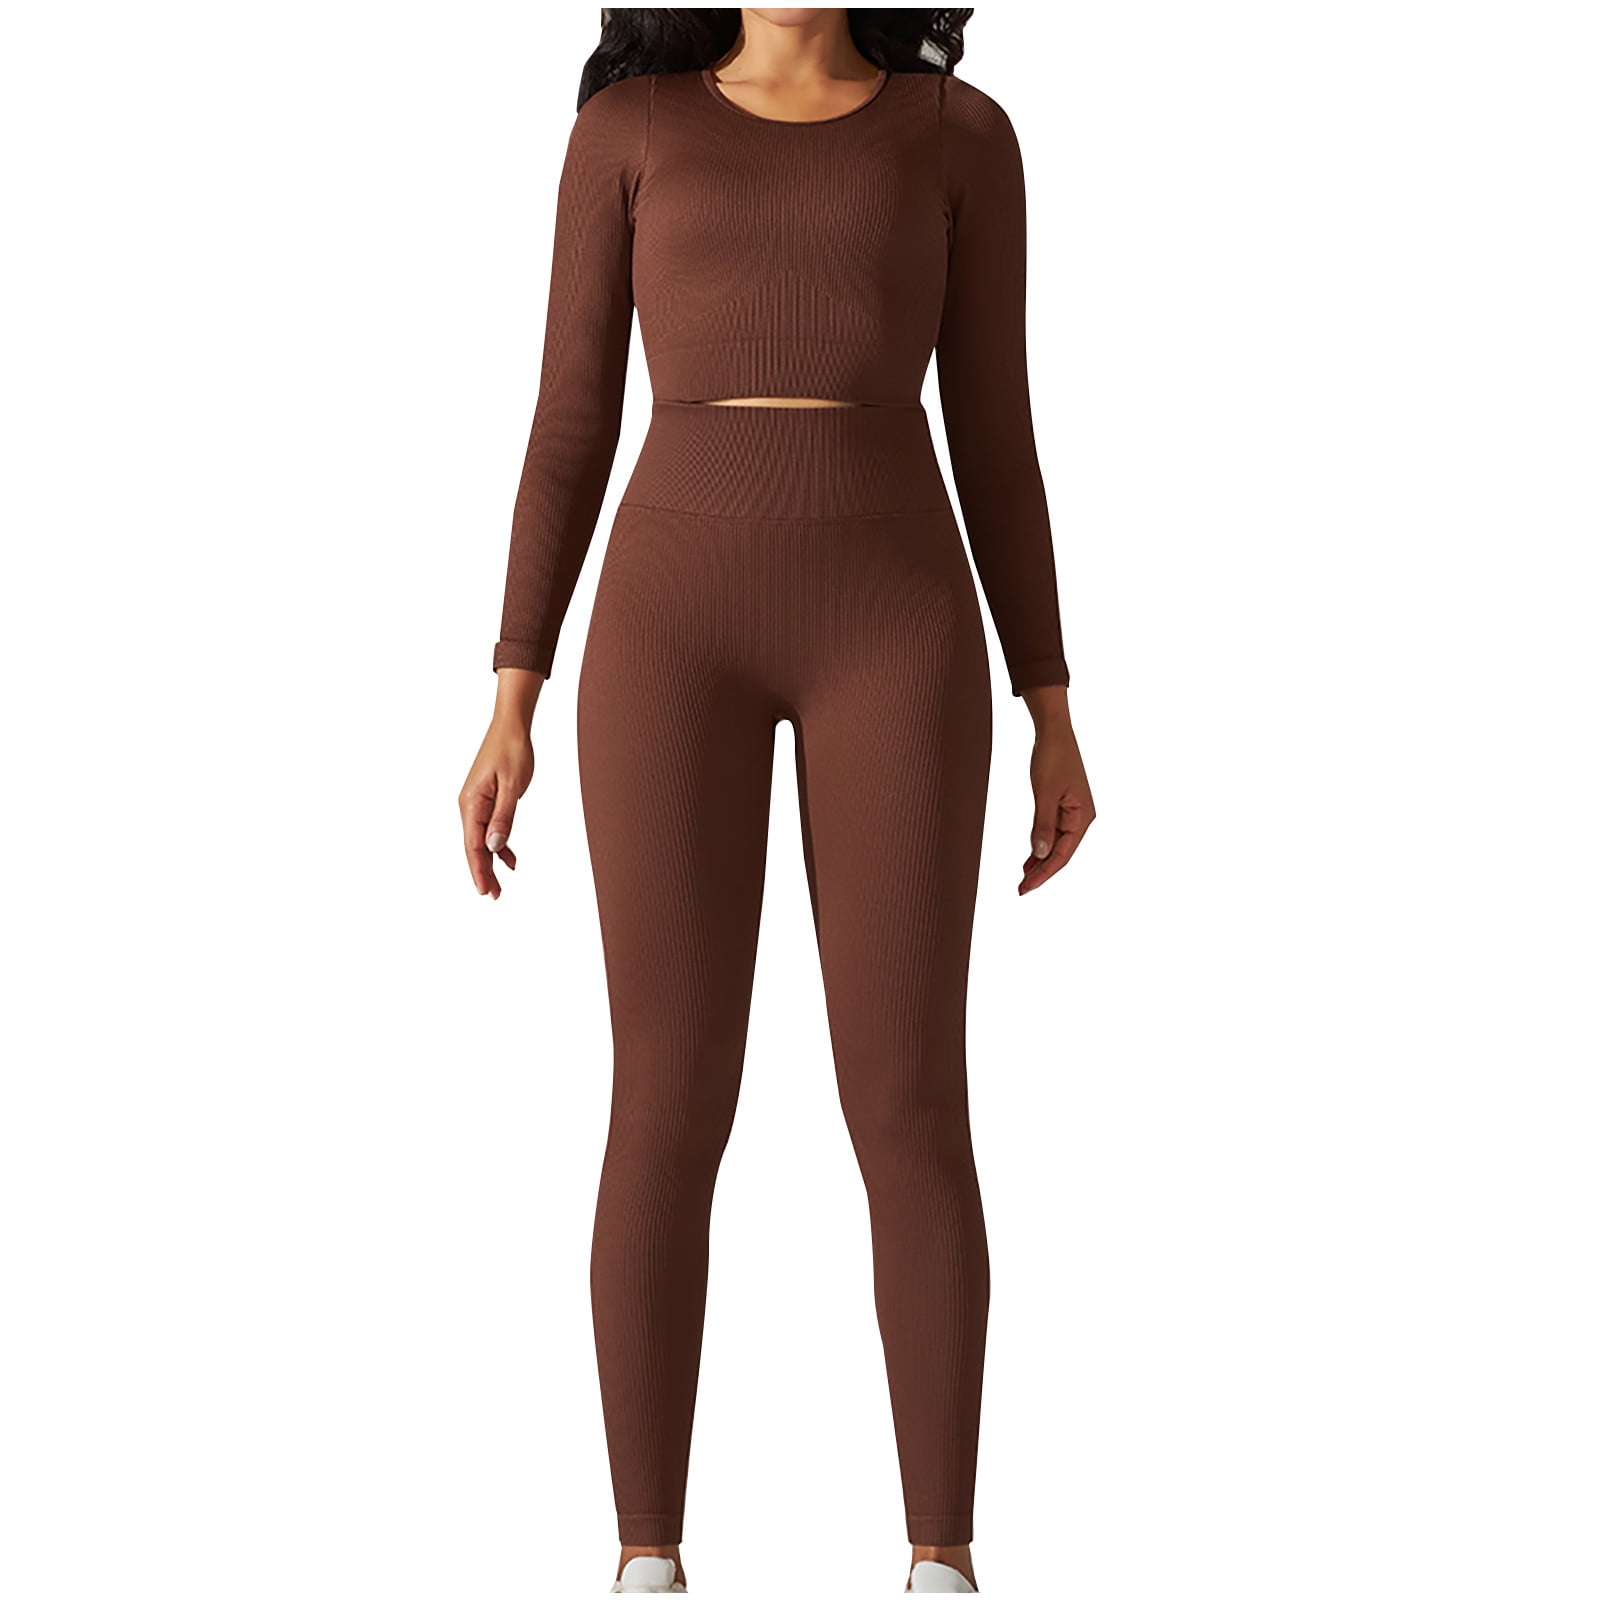 RYRJJ Seamless Workout Outfits for Women 2 Piece Ribbed Long Sleeve Crop  Top and Butt Lifting High Waist Leggings Matching Yoga Sets Sweatsuits(Brown,S)  